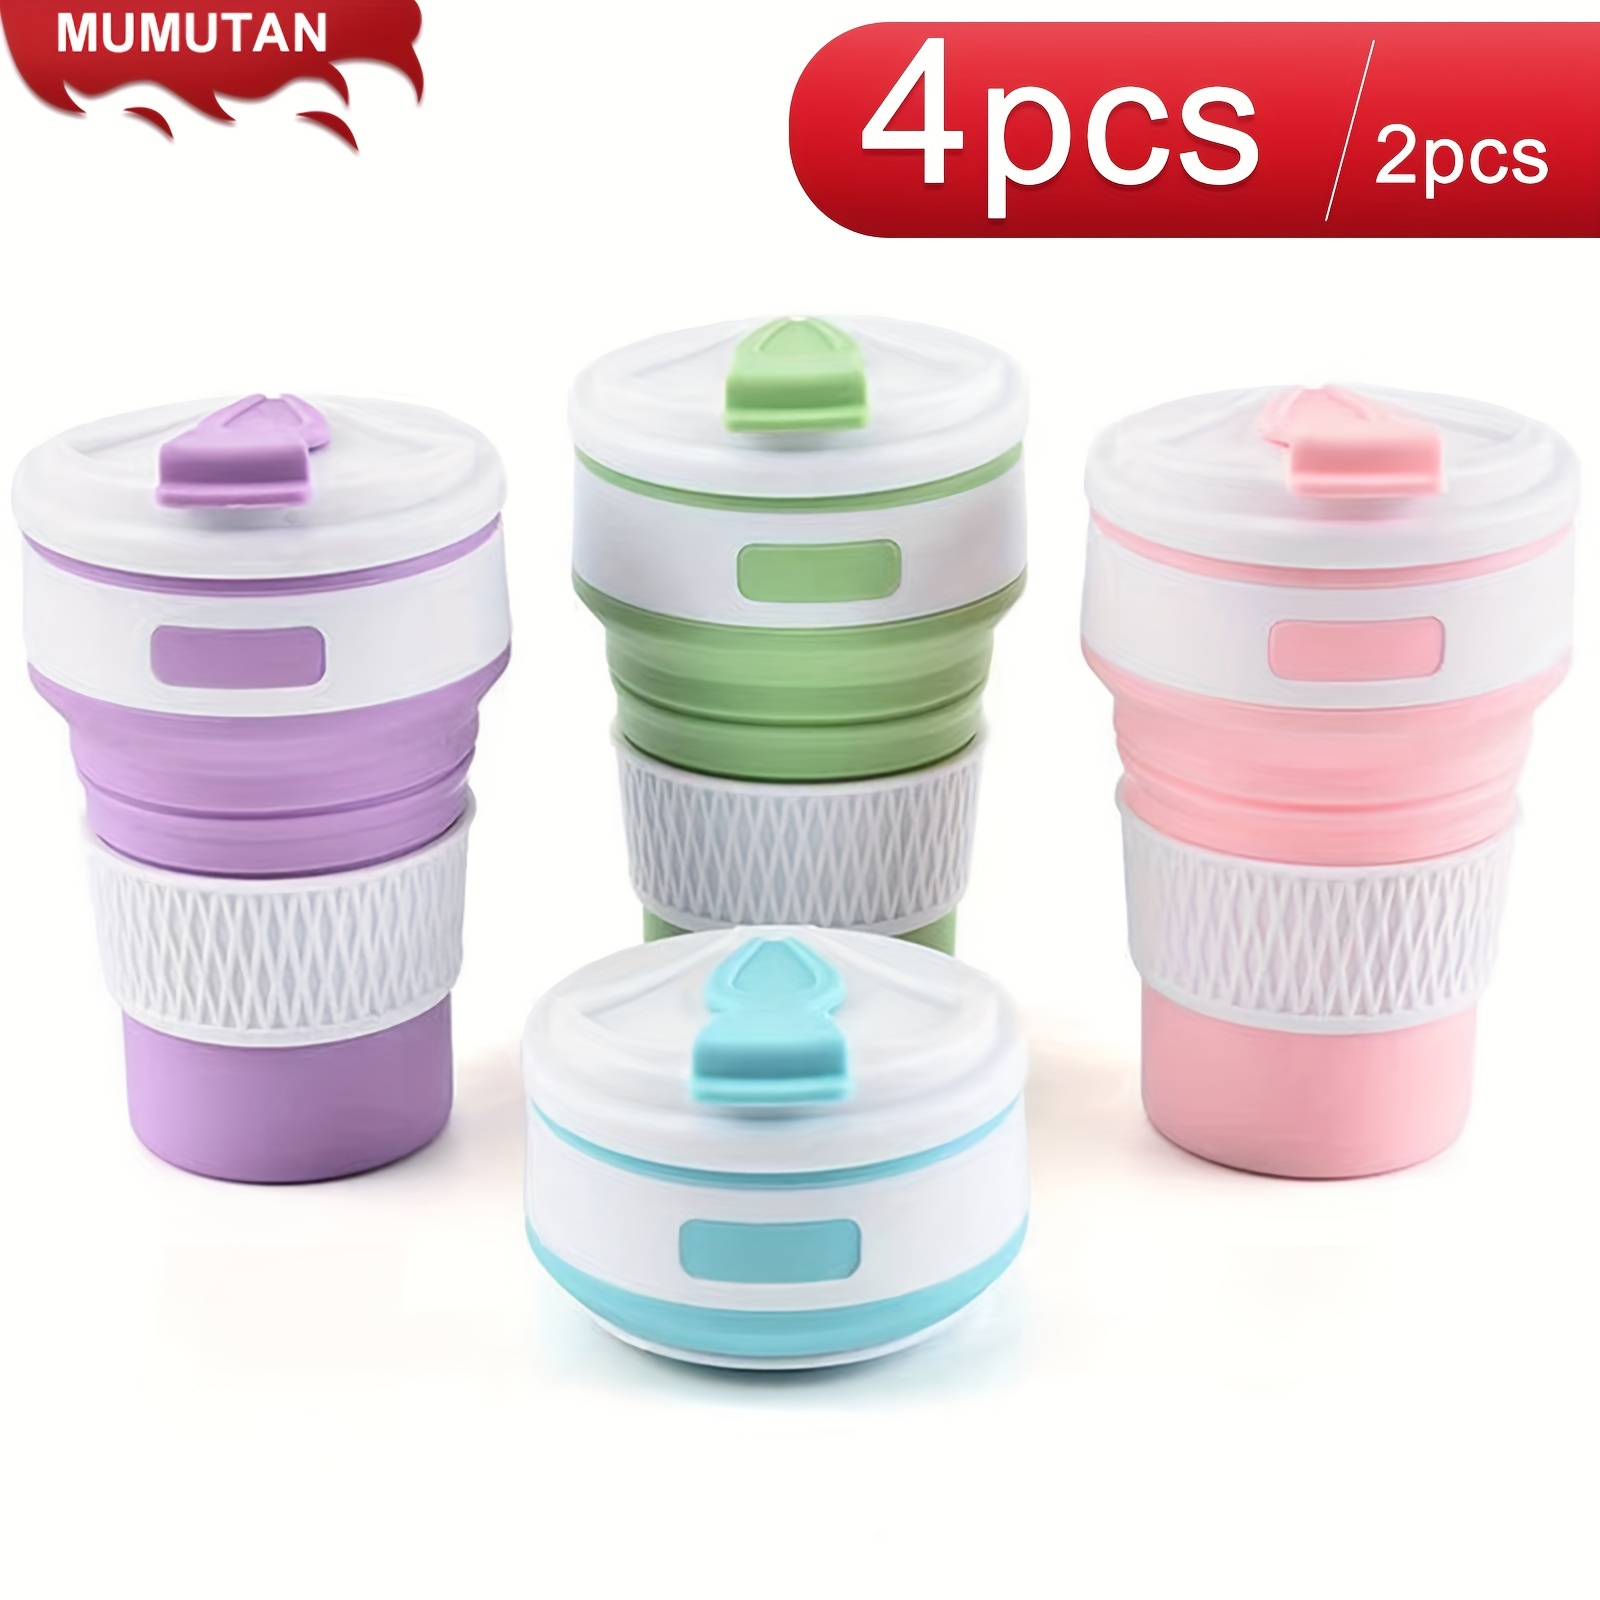 Collapsible Silicone Coffee Cup, Reusable, Easily Portable